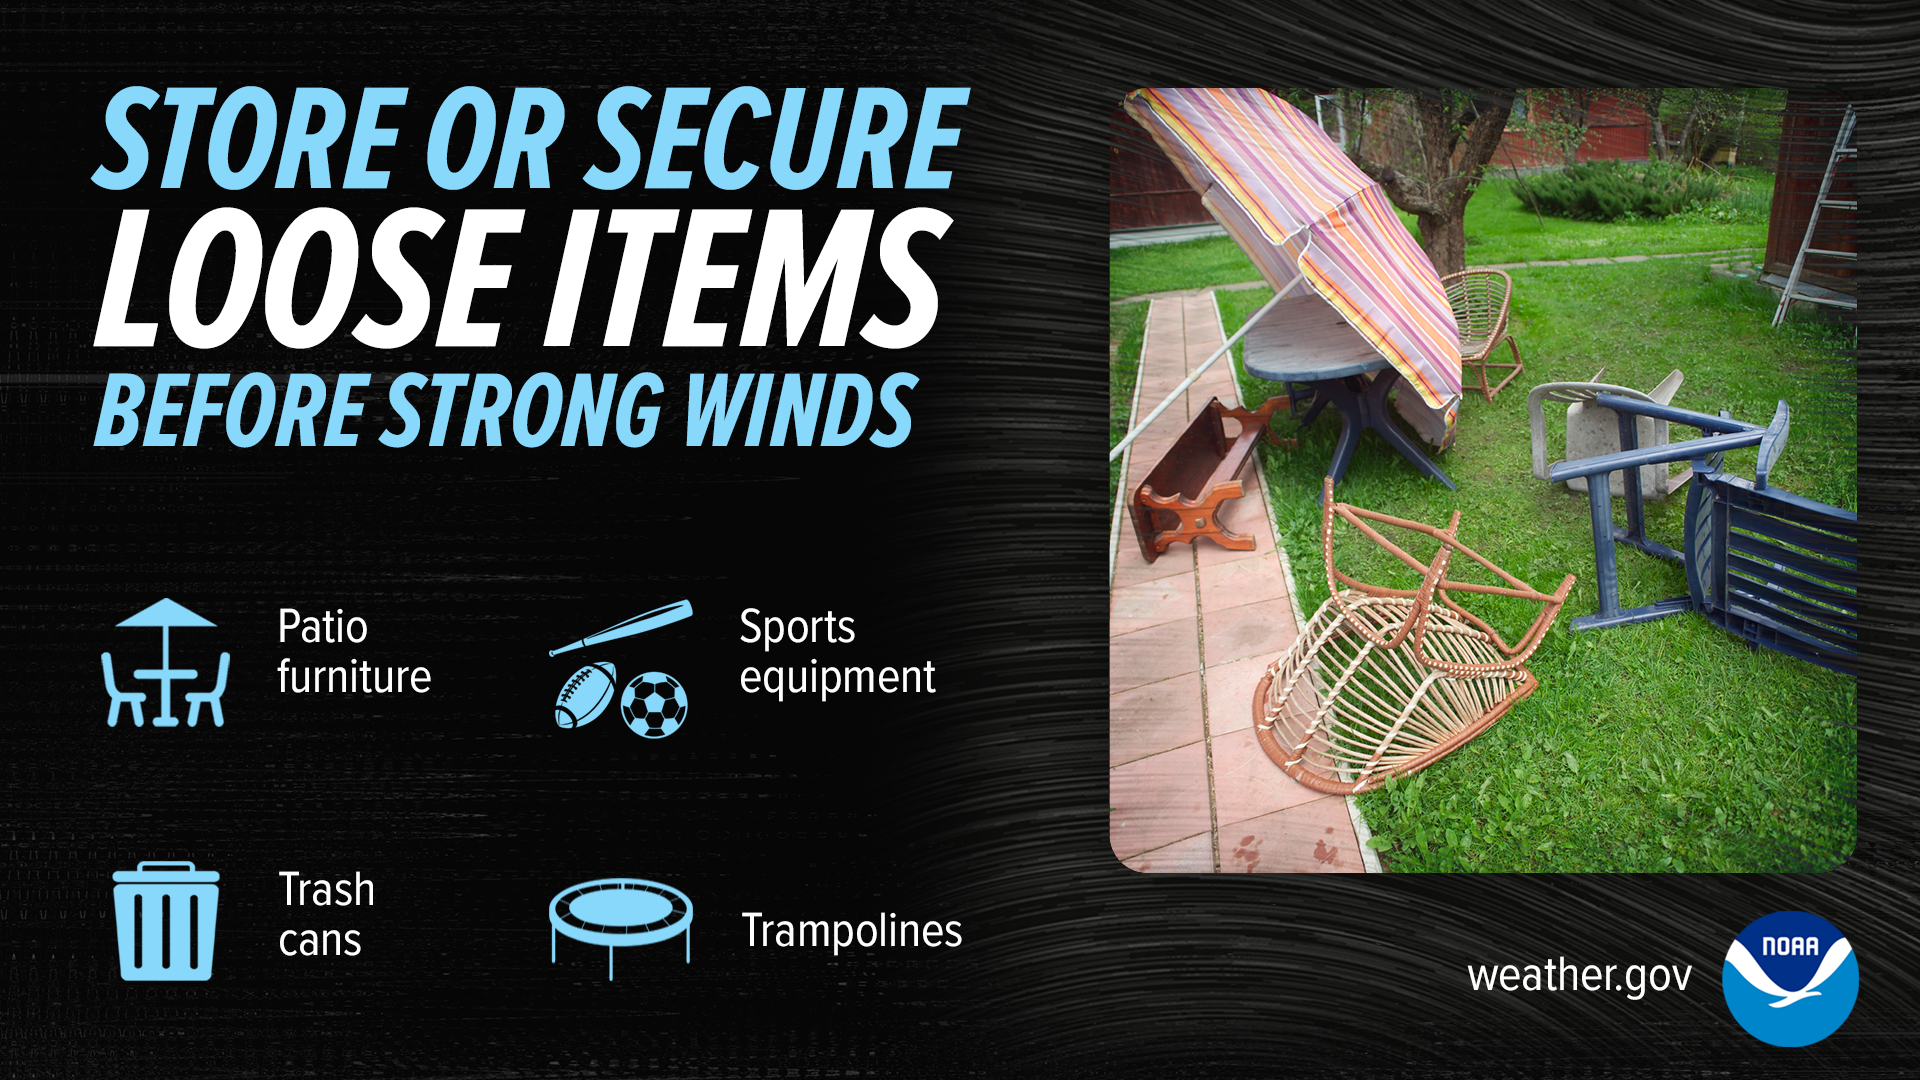 High winds a reminder to secure items during storms